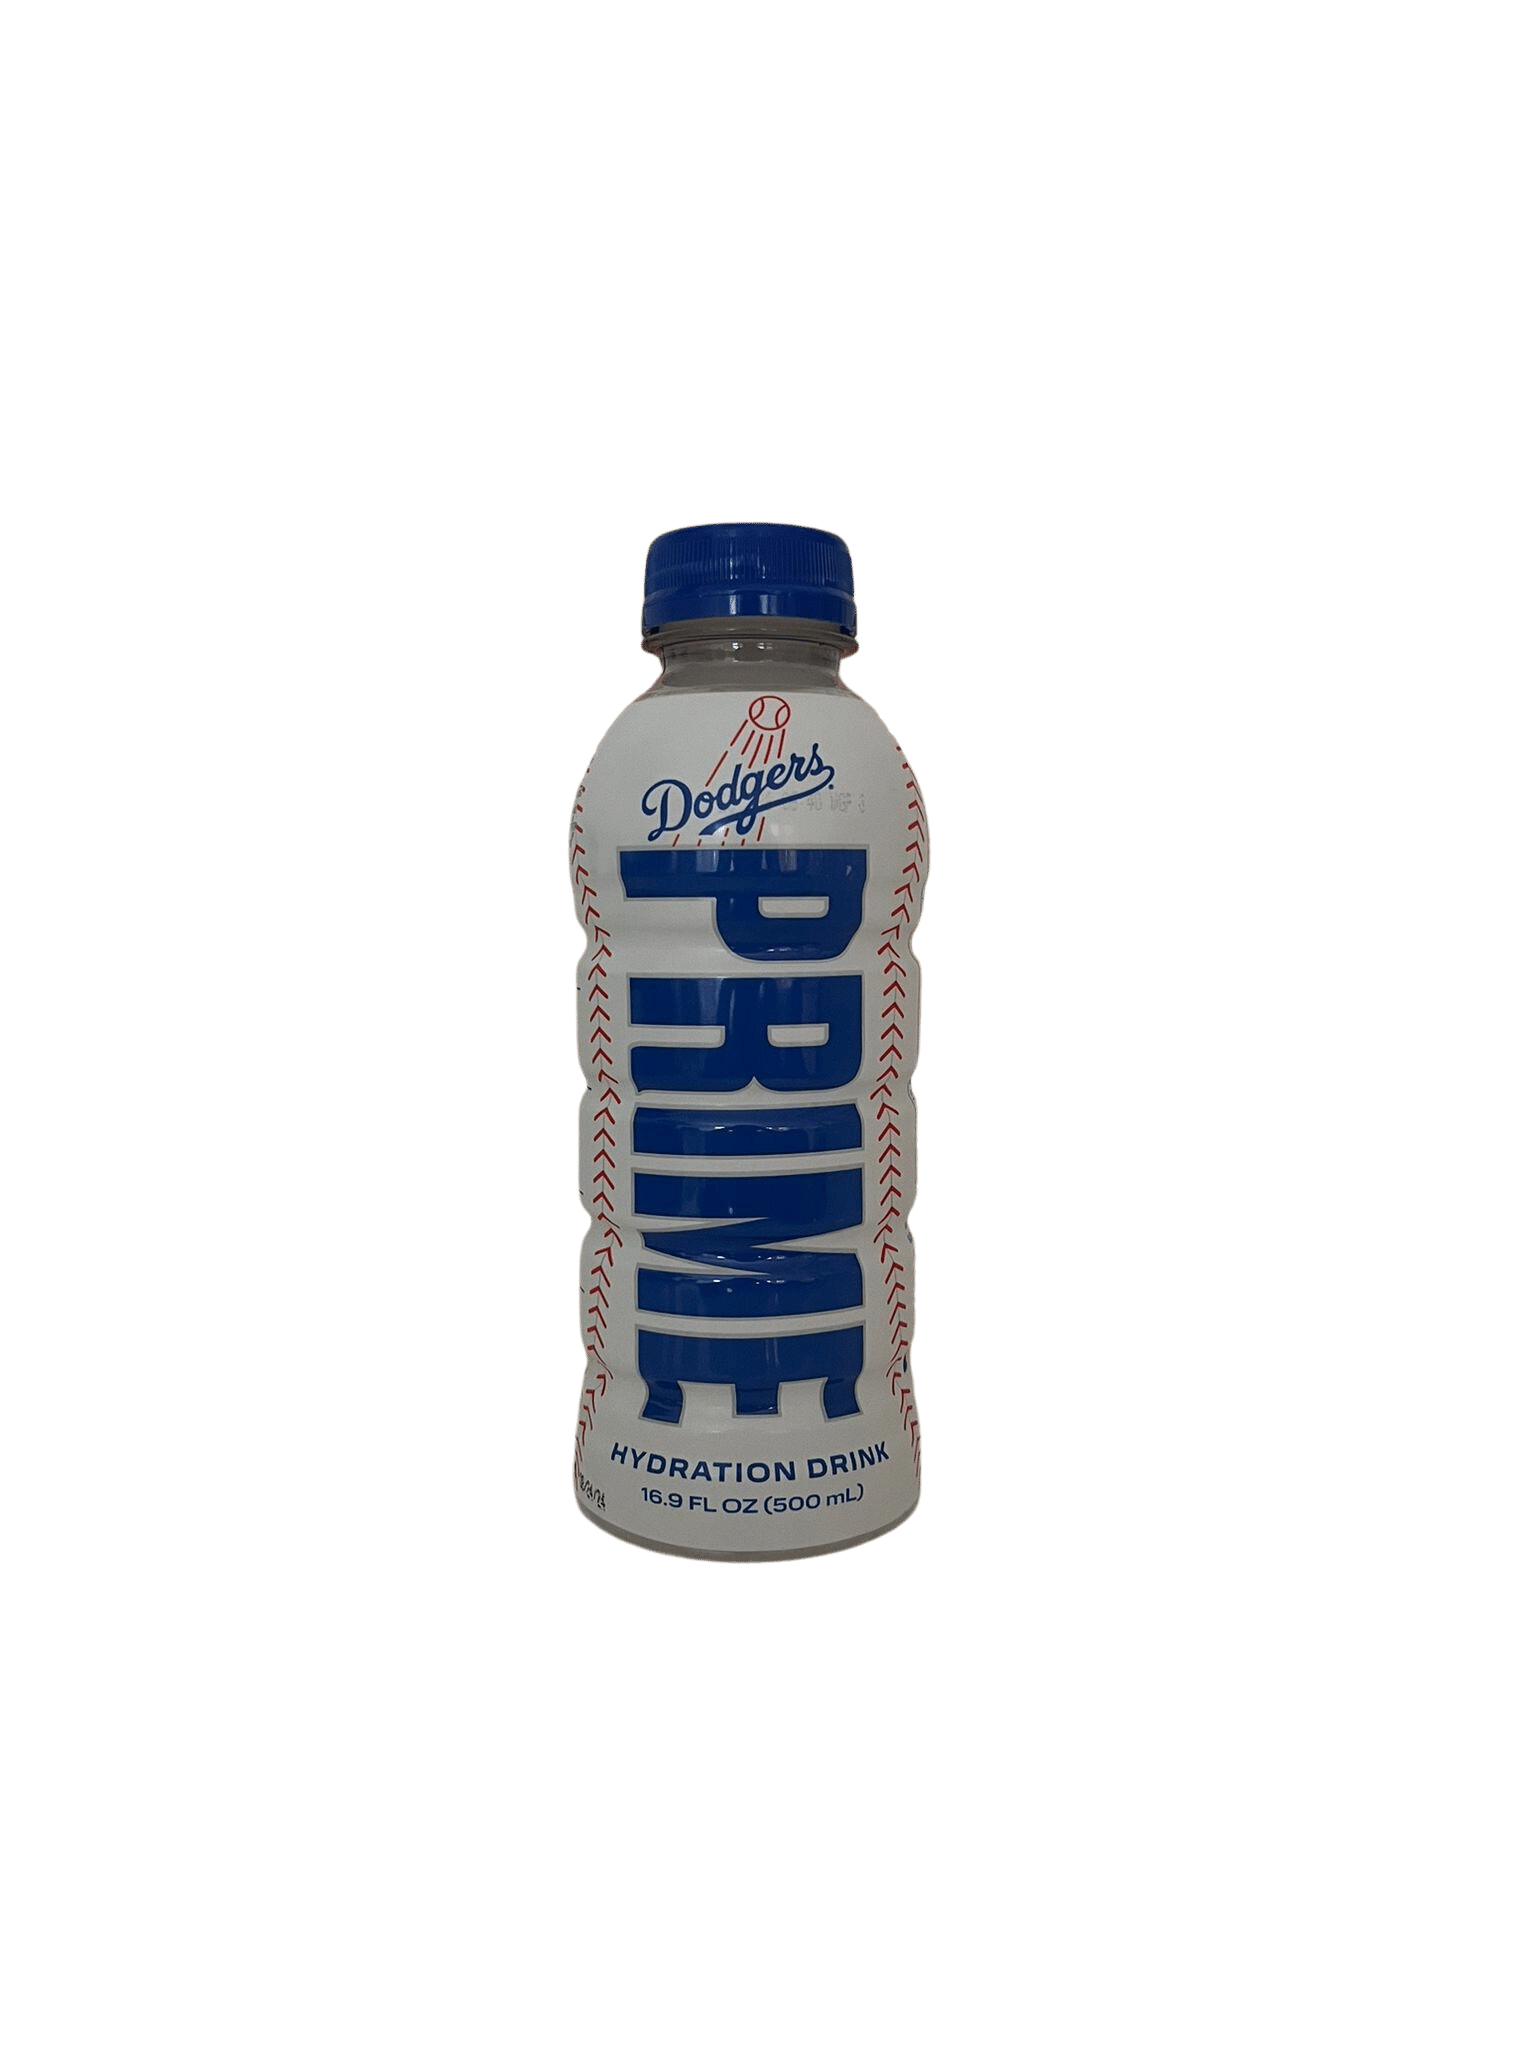 Prime Hydration – Colonial Times